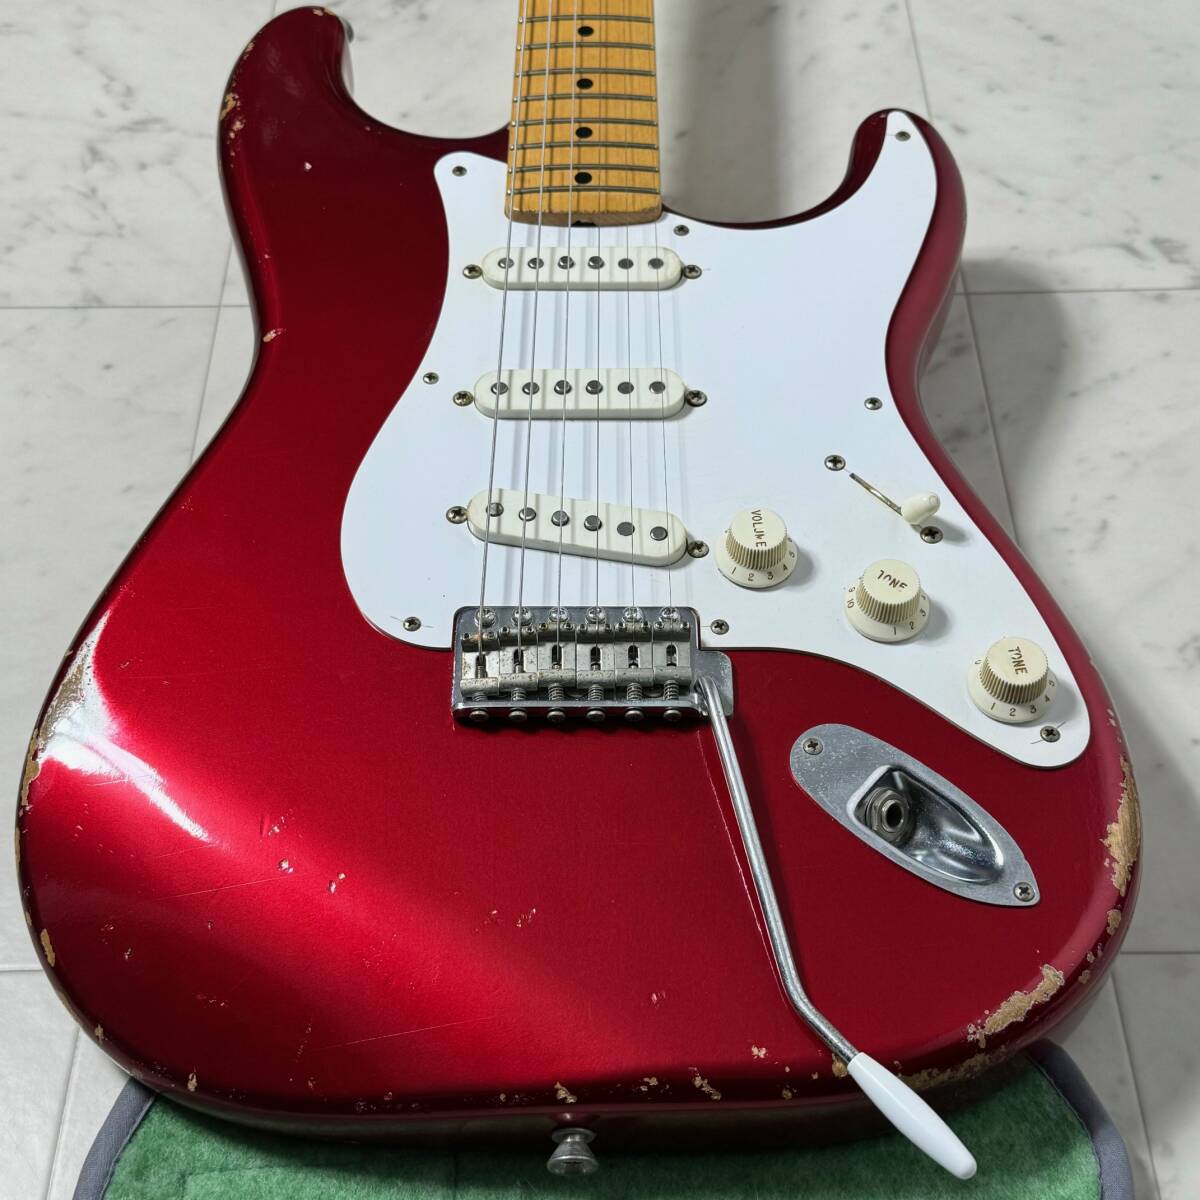 Fullertone Guitars STROKE 57 Rusted Candy Apple Red アーム付の画像5